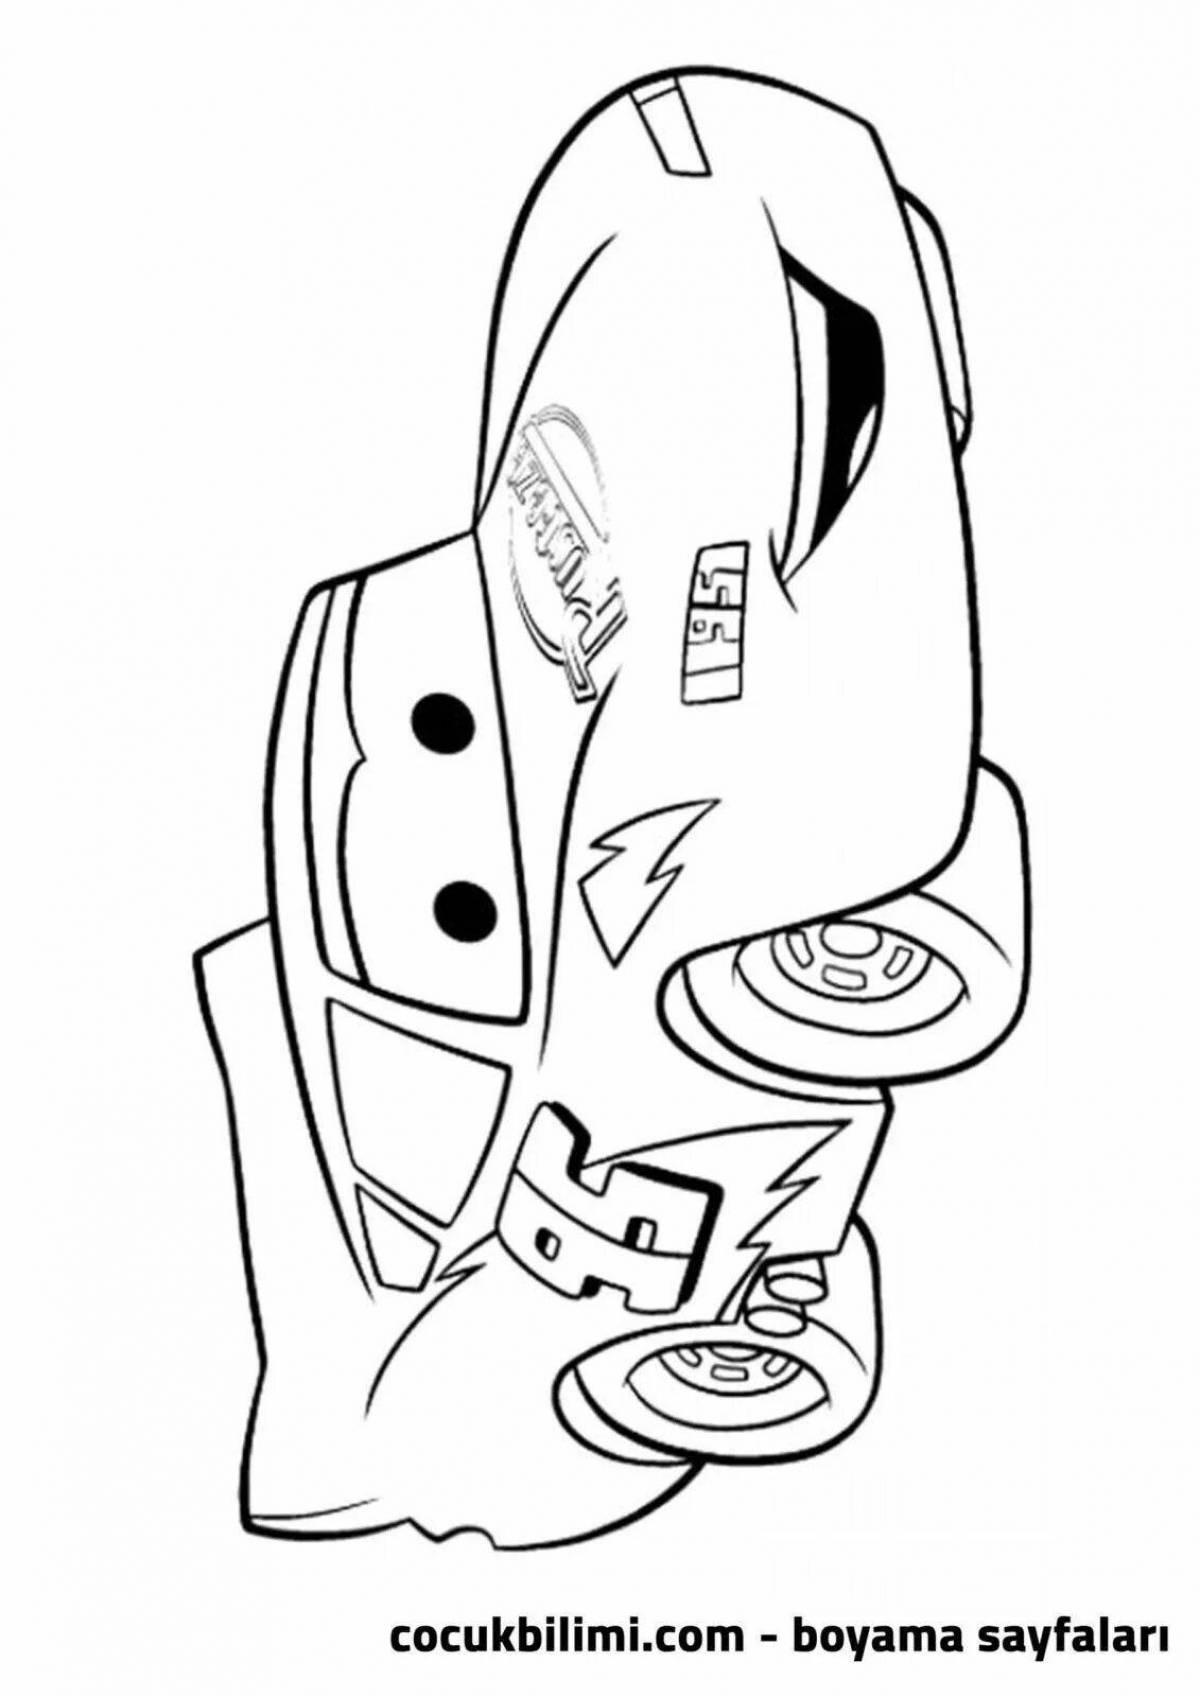 Charming frank cars coloring page